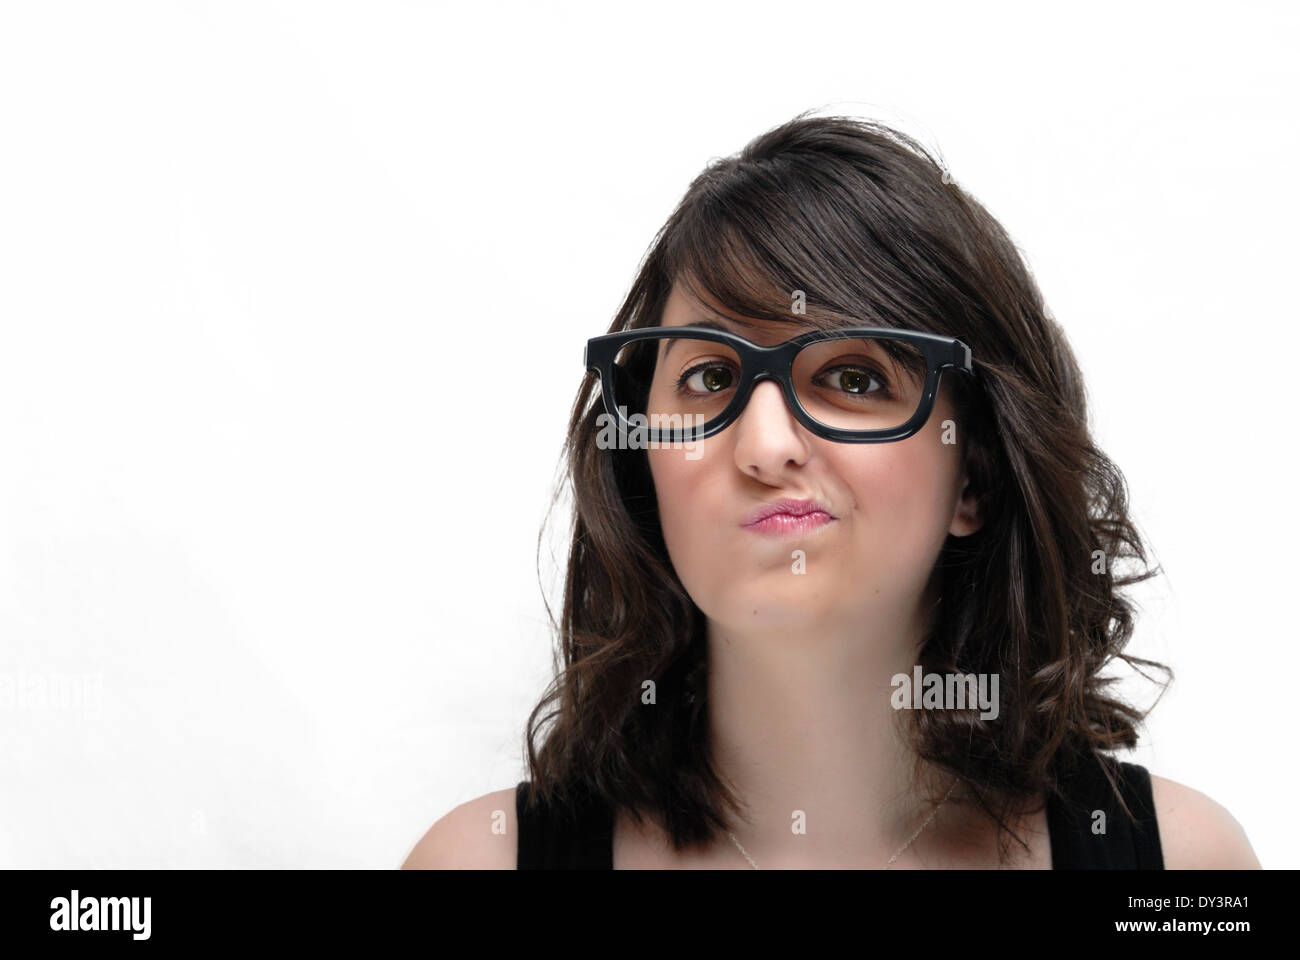 A young woman with long dark hair wearing comical dark eyeglasses makes a funny face. Stock Photo